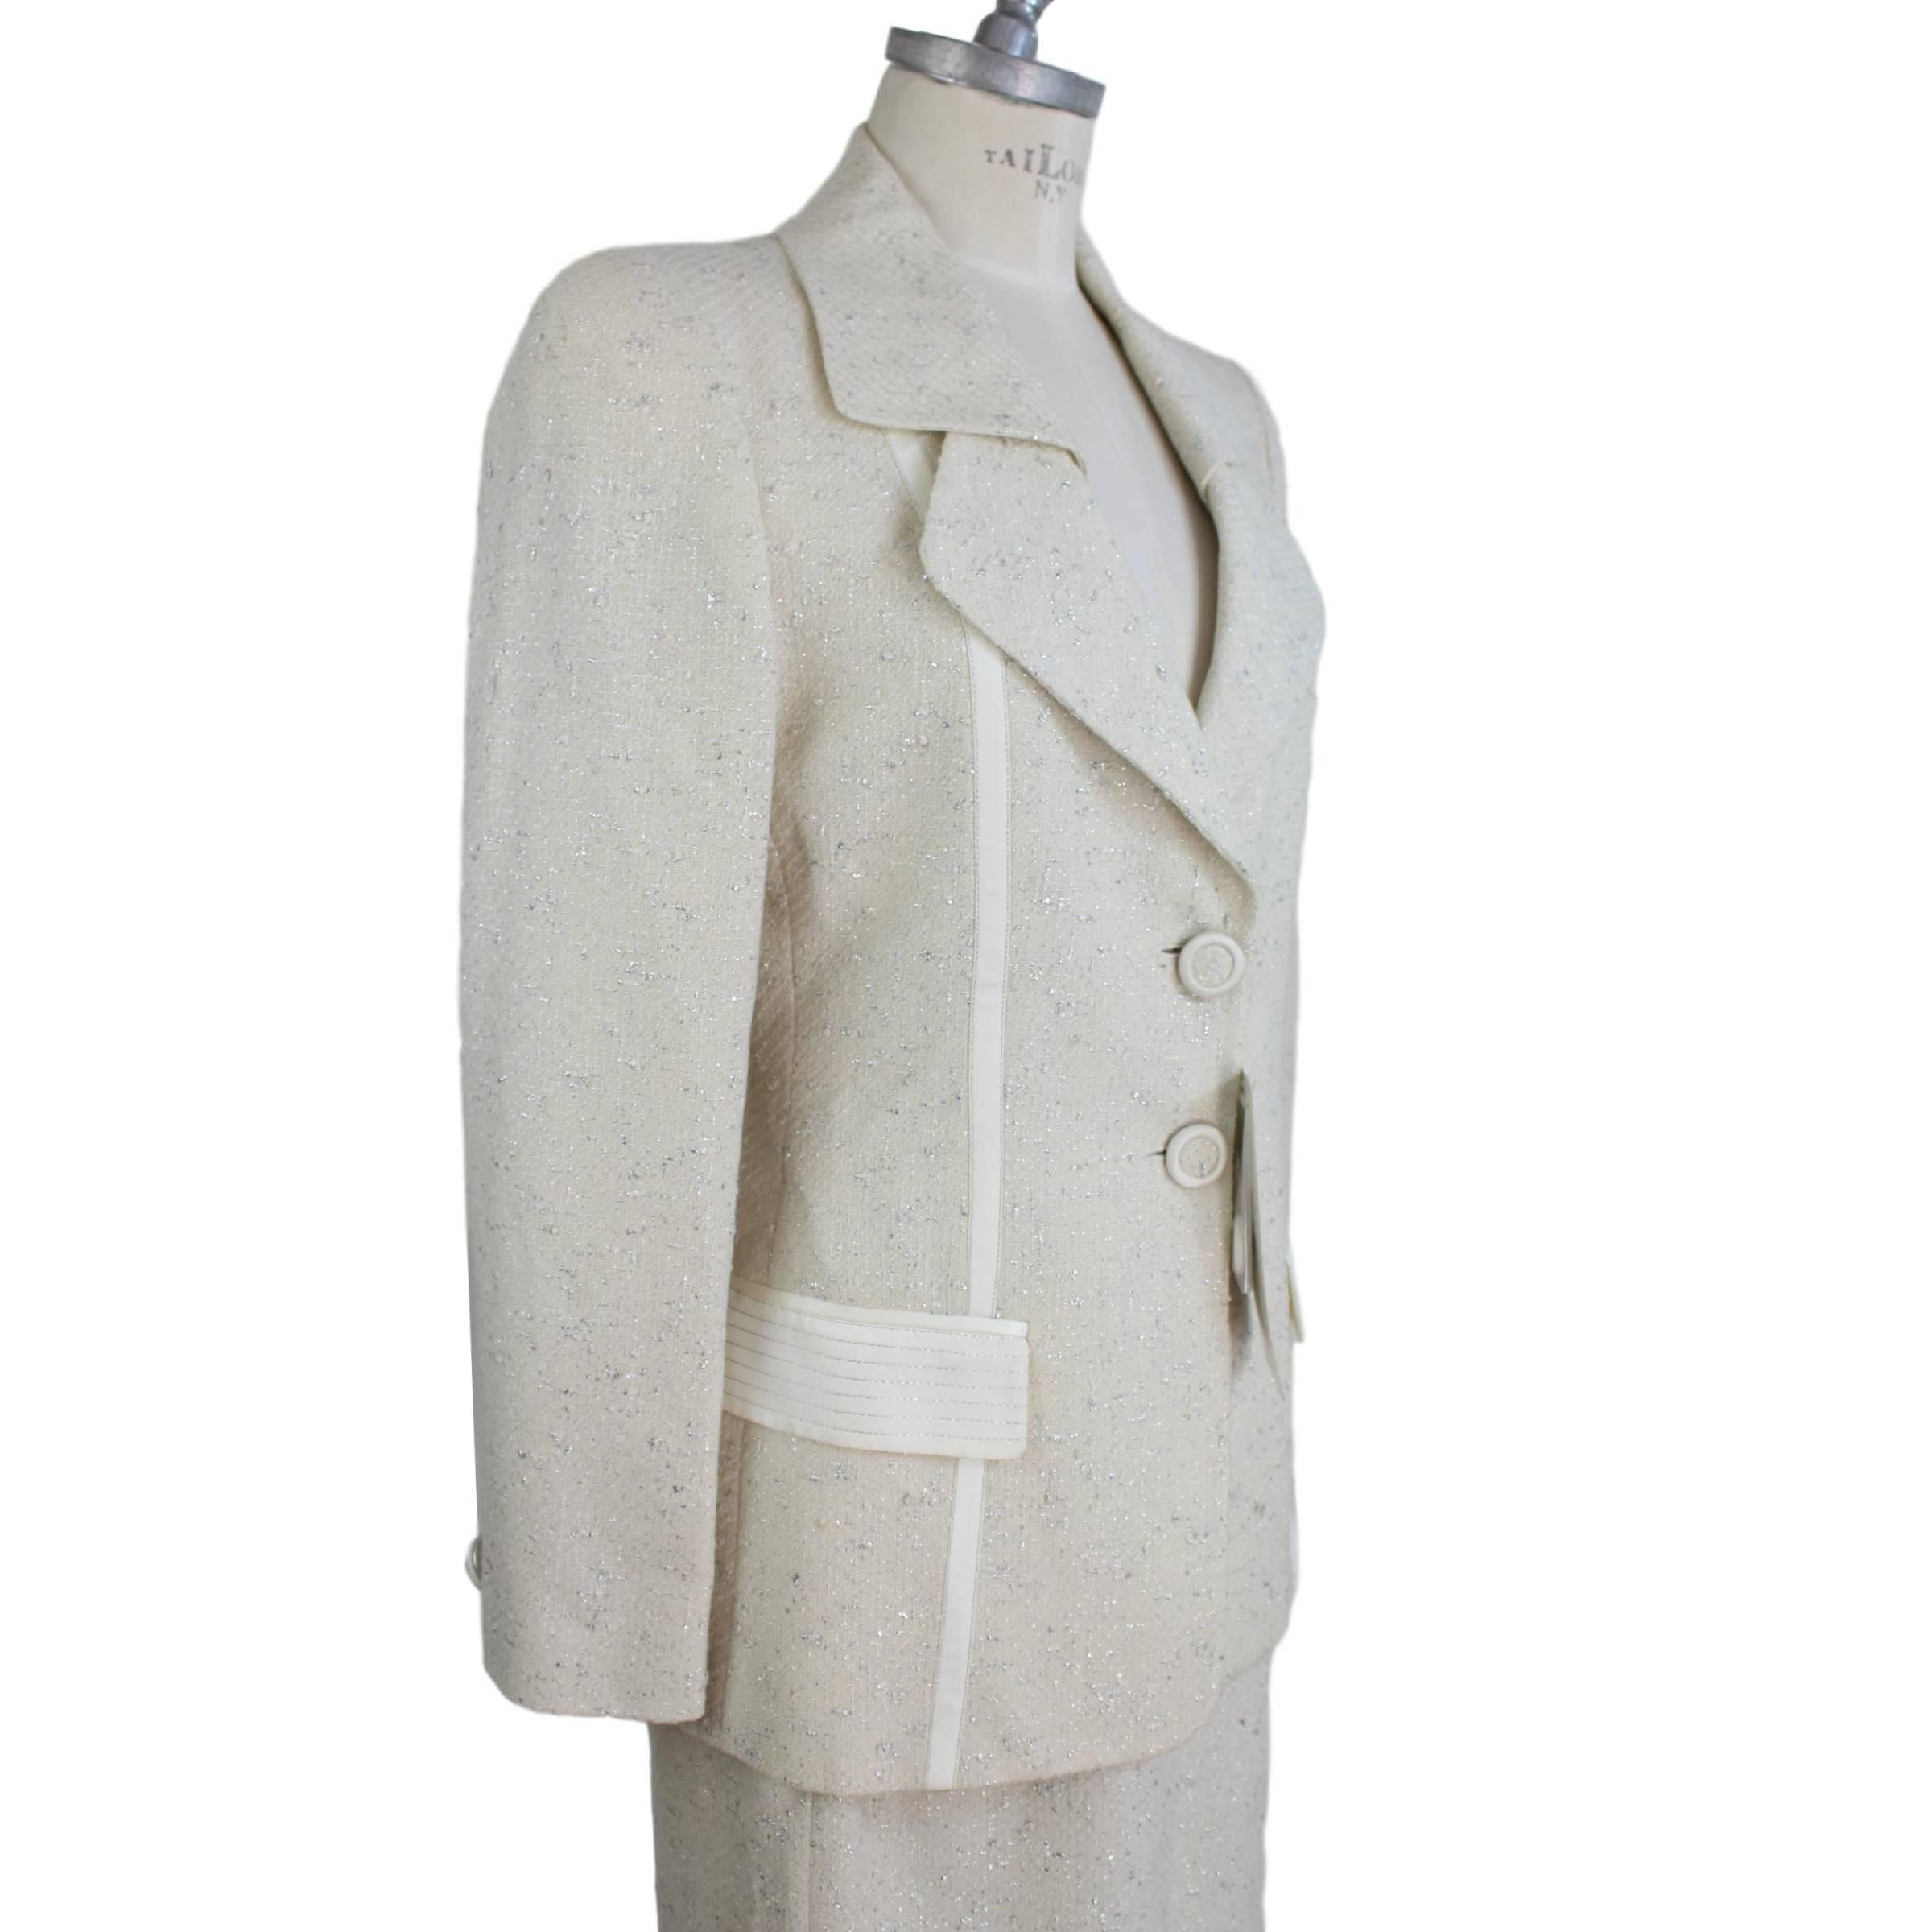 Annalisa Ferro Set Dress Wool and Cotton White Silver Italian Skirt Suit, 1980s In New Condition For Sale In Brindisi, IT